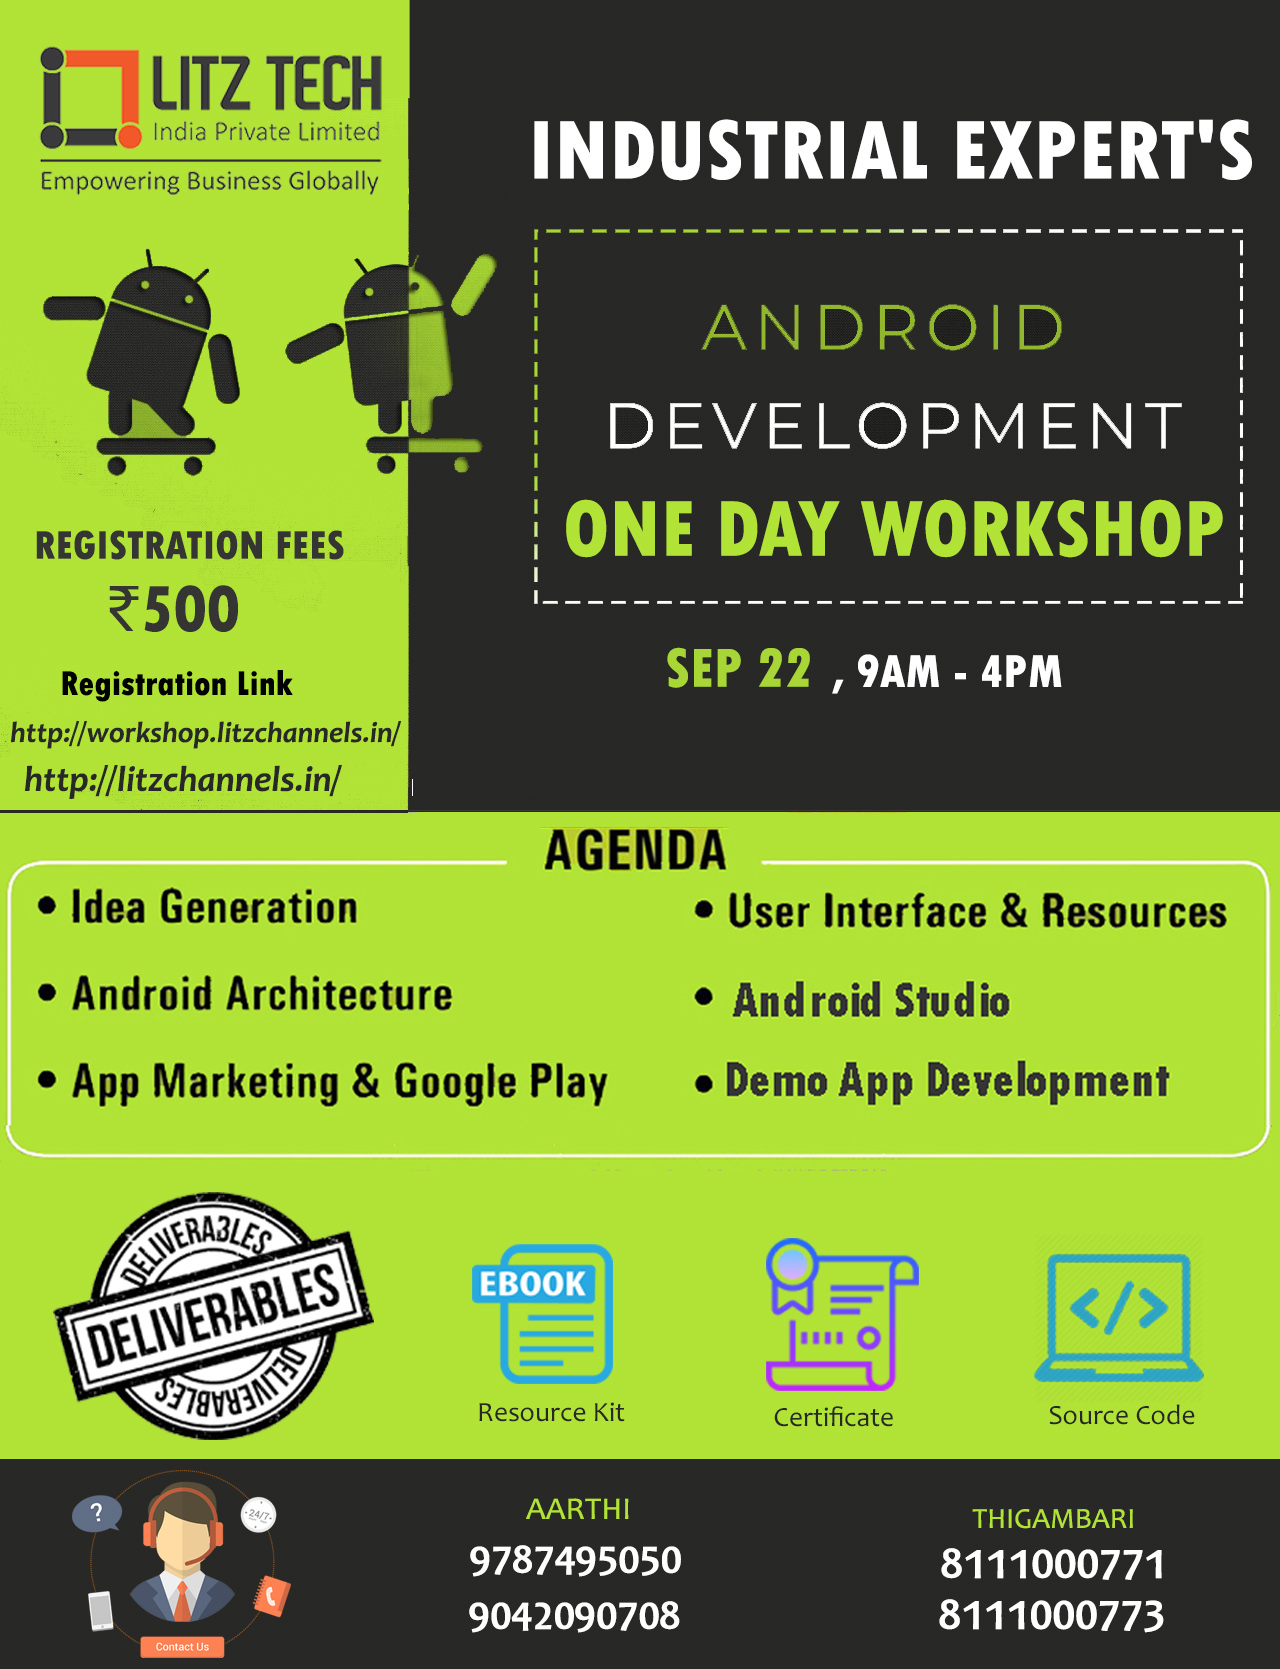 BEST ANDROID WORKSHOP IN COIMBATORE, Coimbatore, Tamil Nadu, India